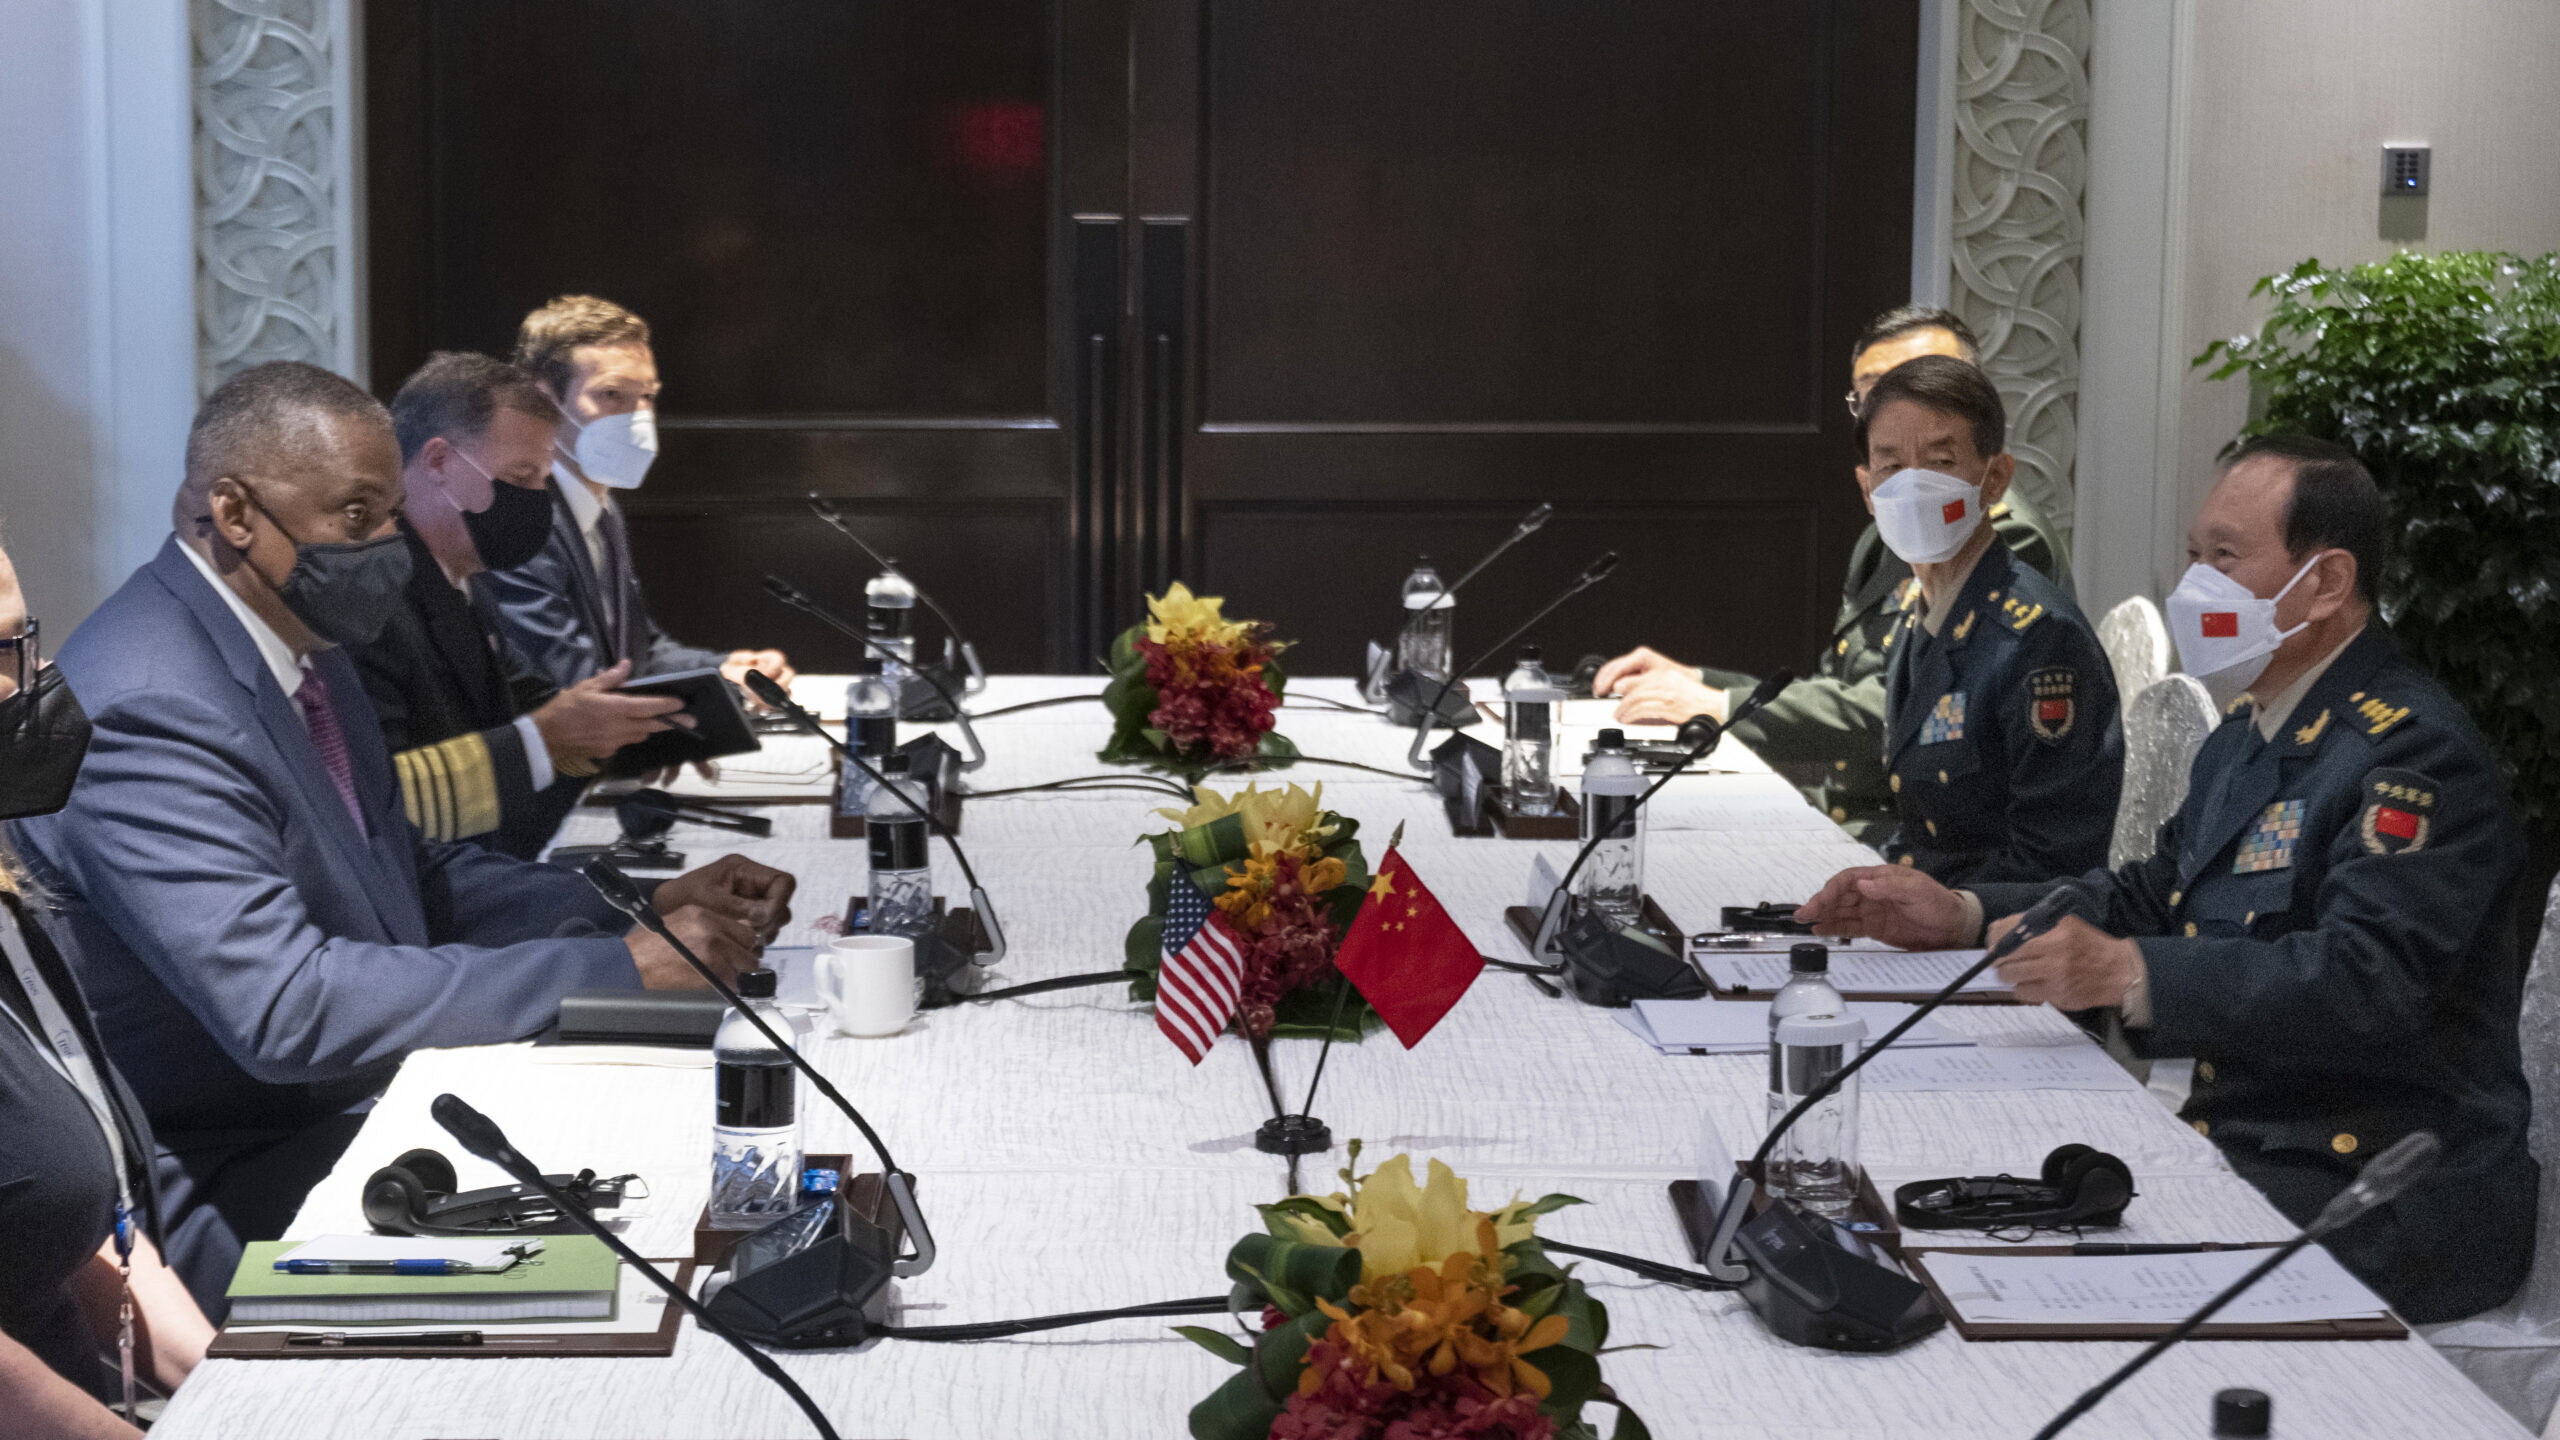 SecDef Austin and PRC Defense Minister Wei meet at Shangri La